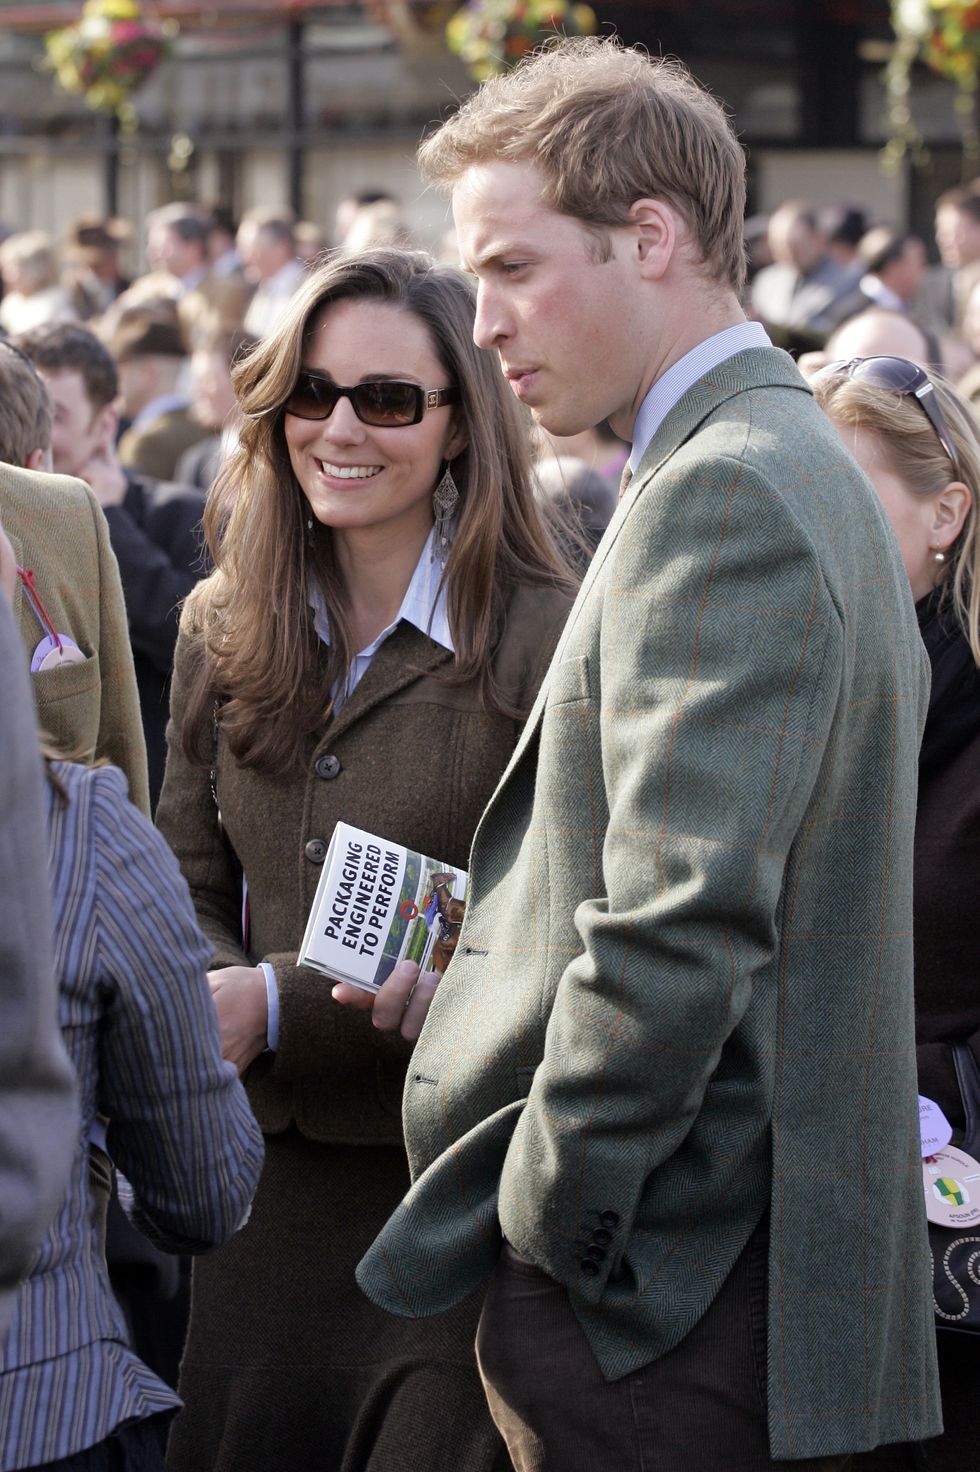 prince william and kate middleton attend day 1 of the cheltenham horse racing festival